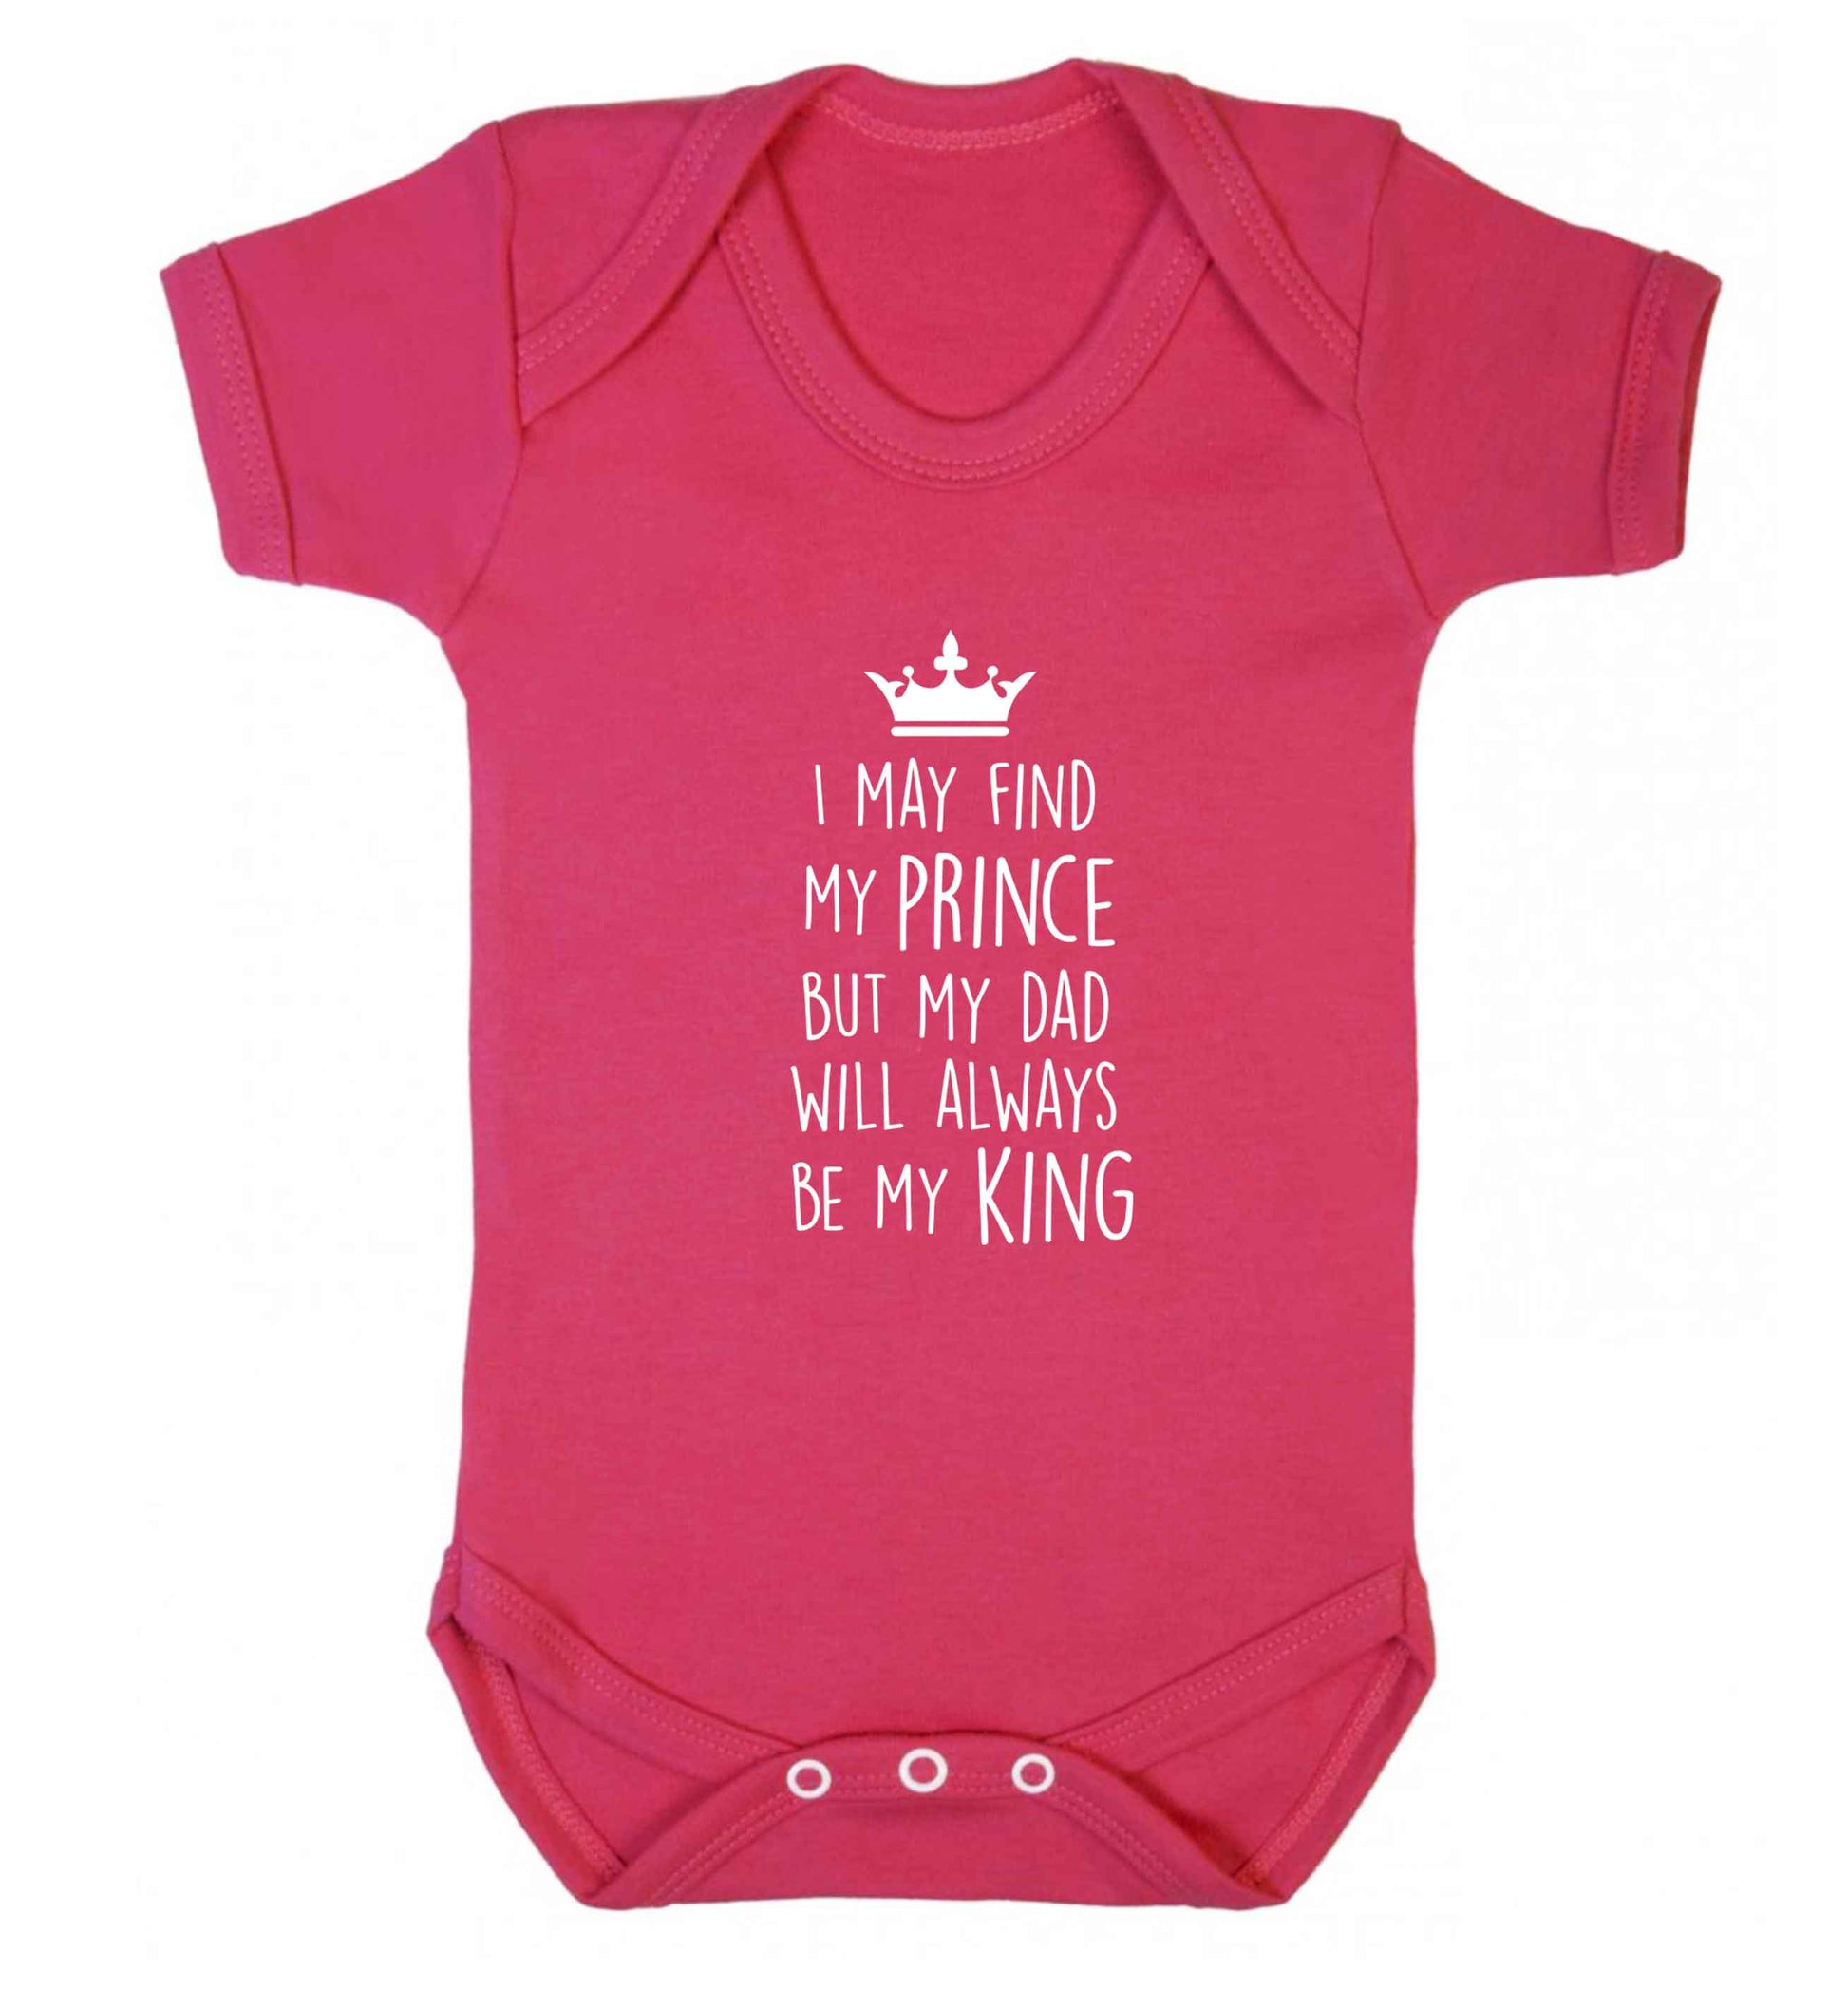 I may find my prince but my dad will always be my king baby vest dark pink 18-24 months